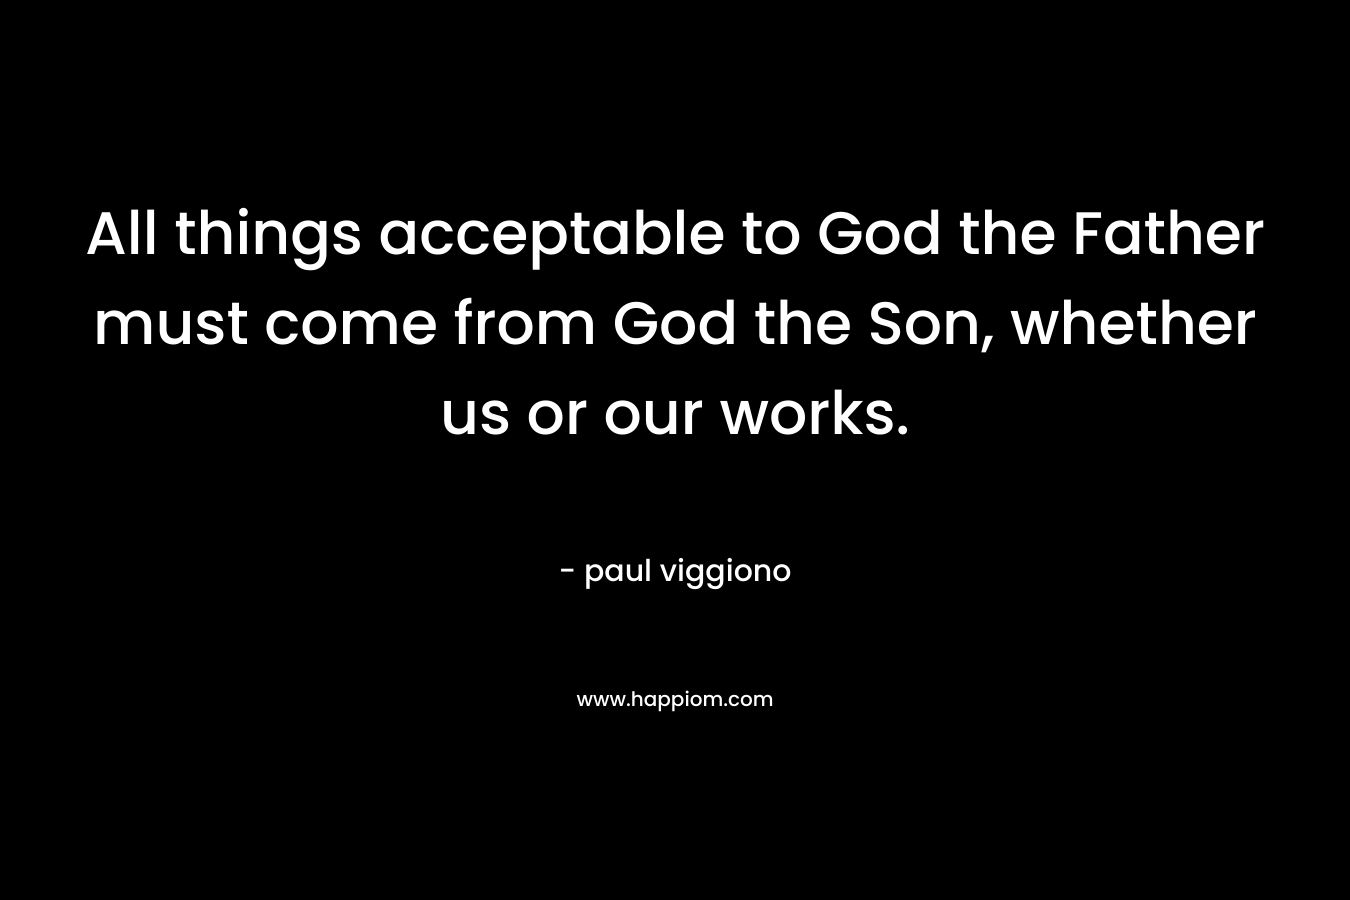 All things acceptable to God the Father must come from God the Son, whether us or our works.